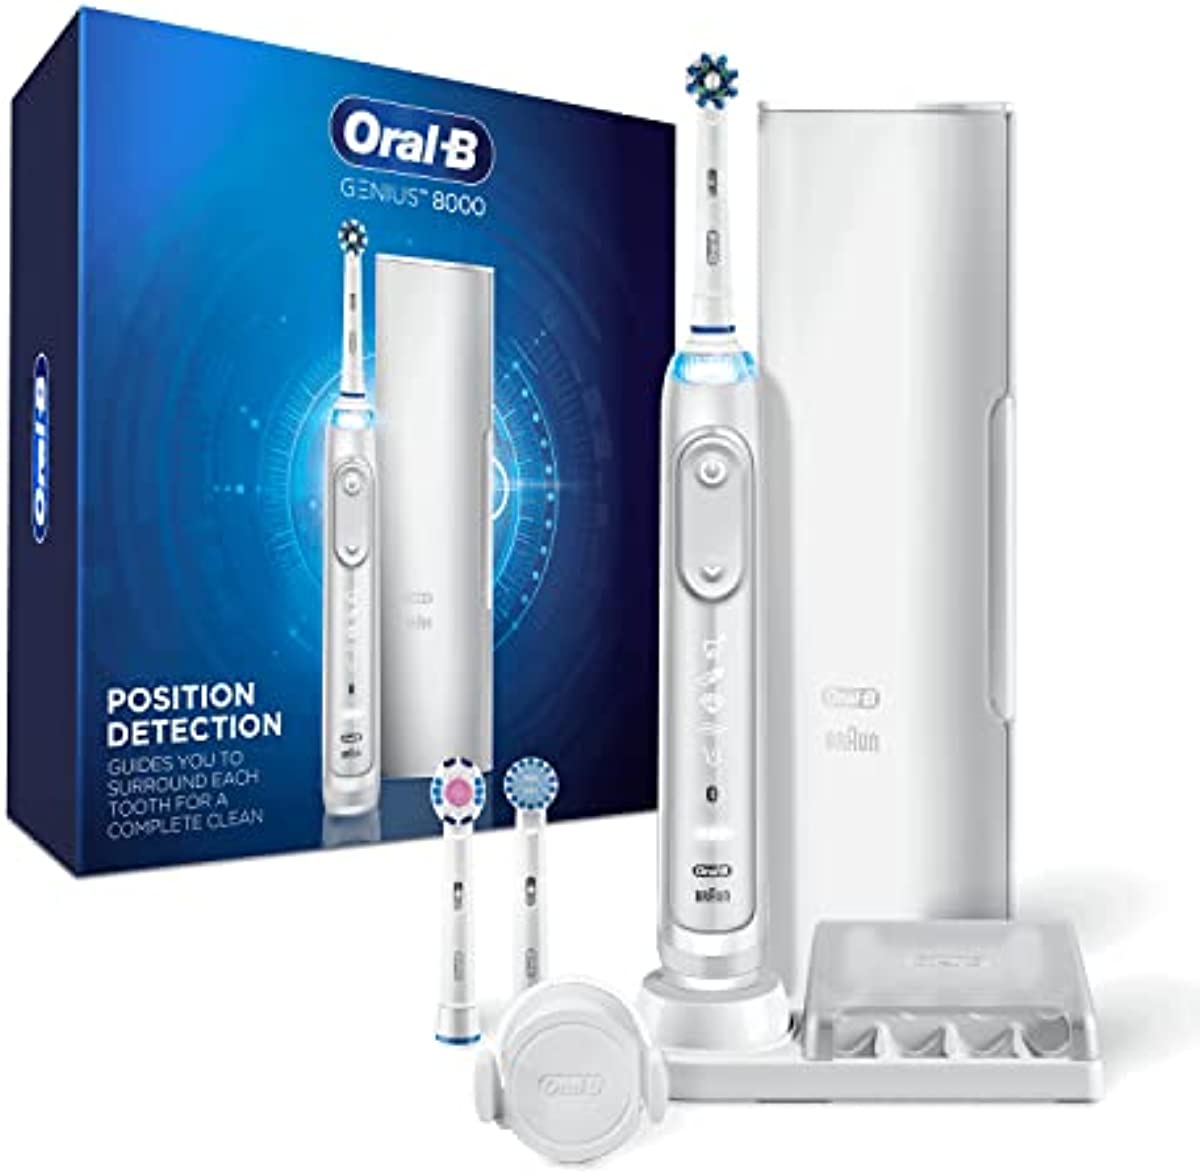 Oral-B 8000 Electric Toothbrush with Bluetooth Connectivity, White